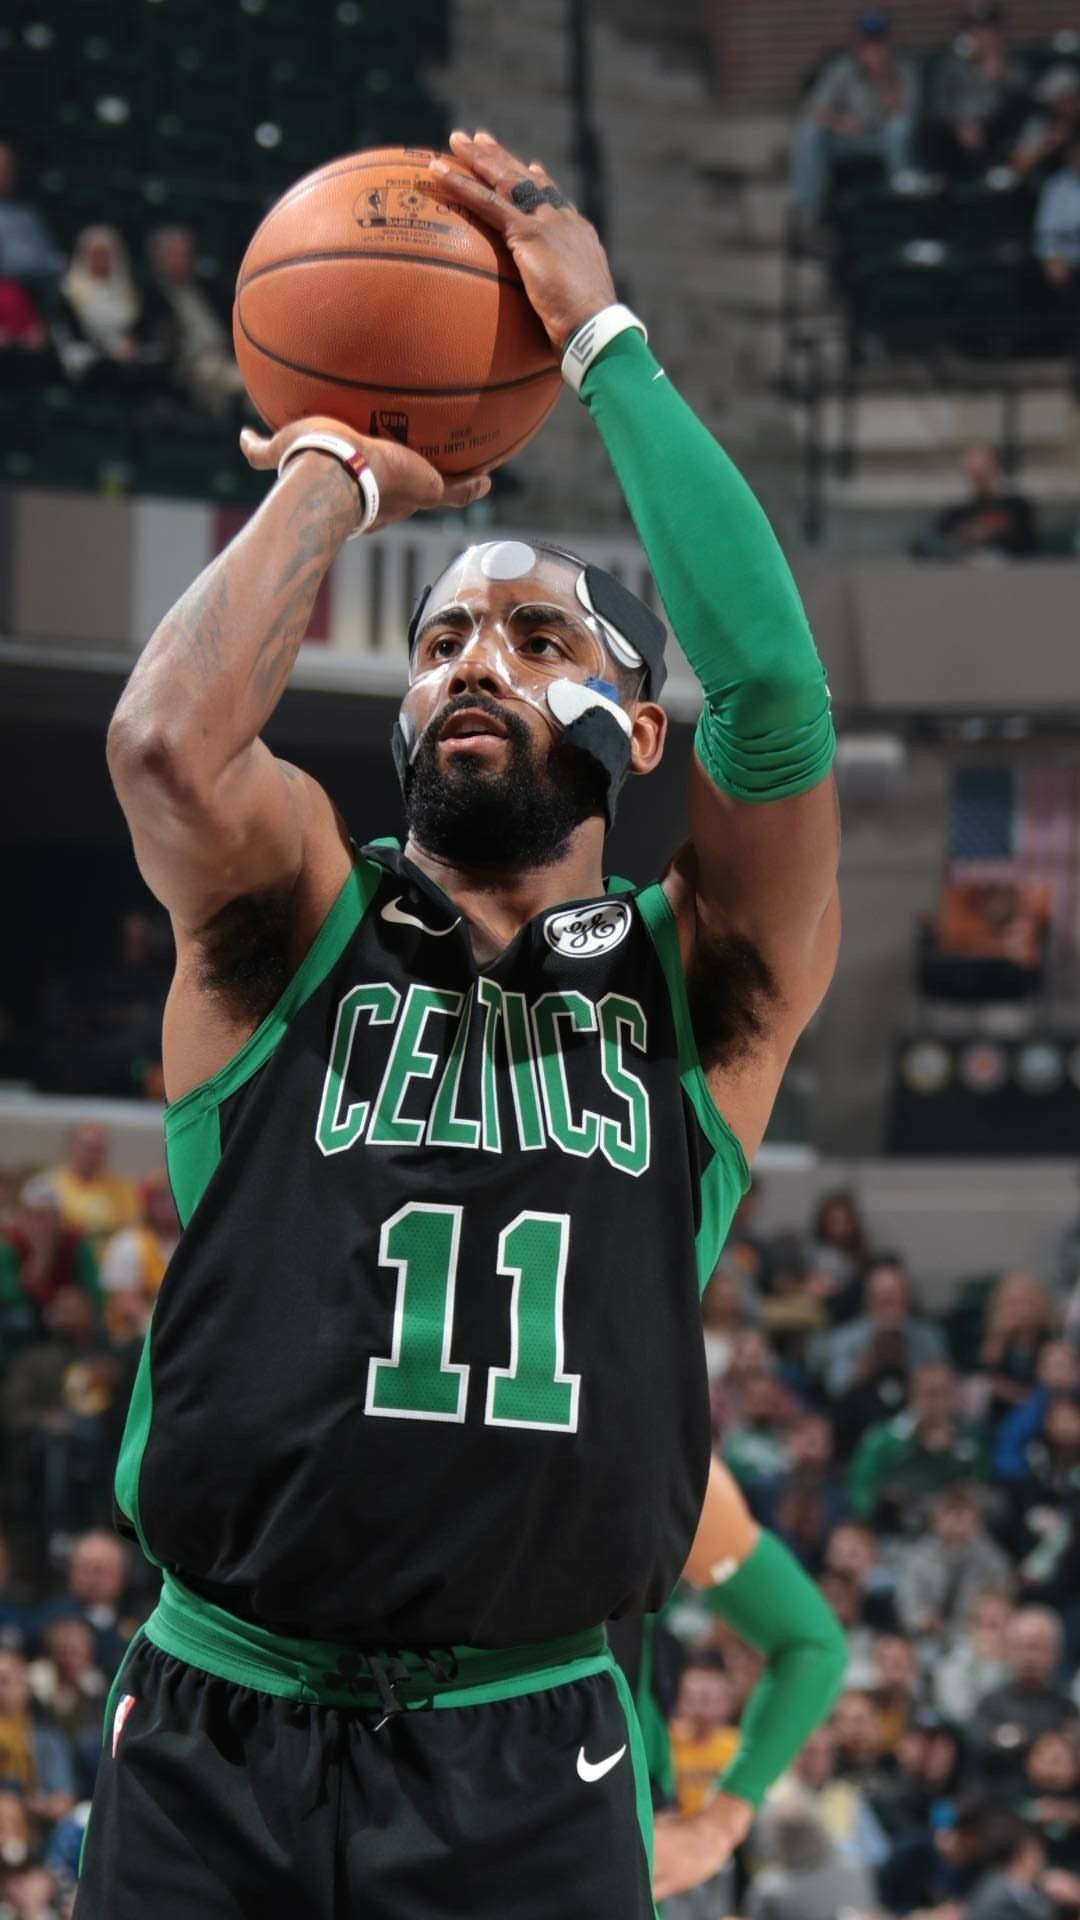 Free Kyrie Irving Wallpaper Downloads, [100+] Kyrie Irving Wallpapers for  FREE 